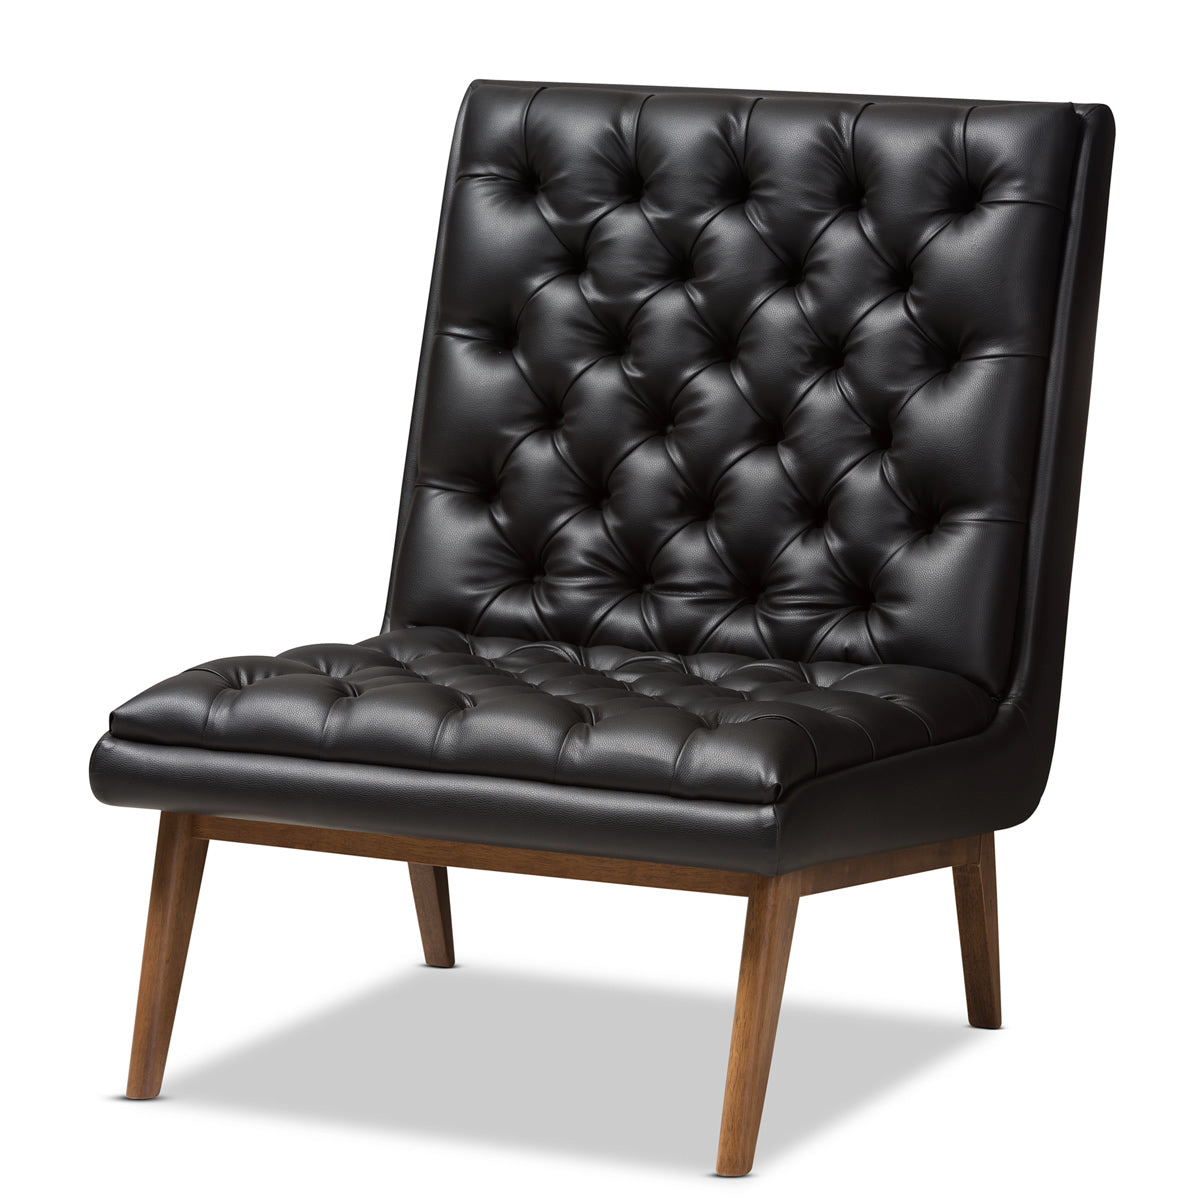 Baxton Studio Annetha Mid-Century Modern Black Faux Leather Upholstered Walnut Finished Wood Lounge Chair Baxton Studio-chairs-Minimal And Modern - 1